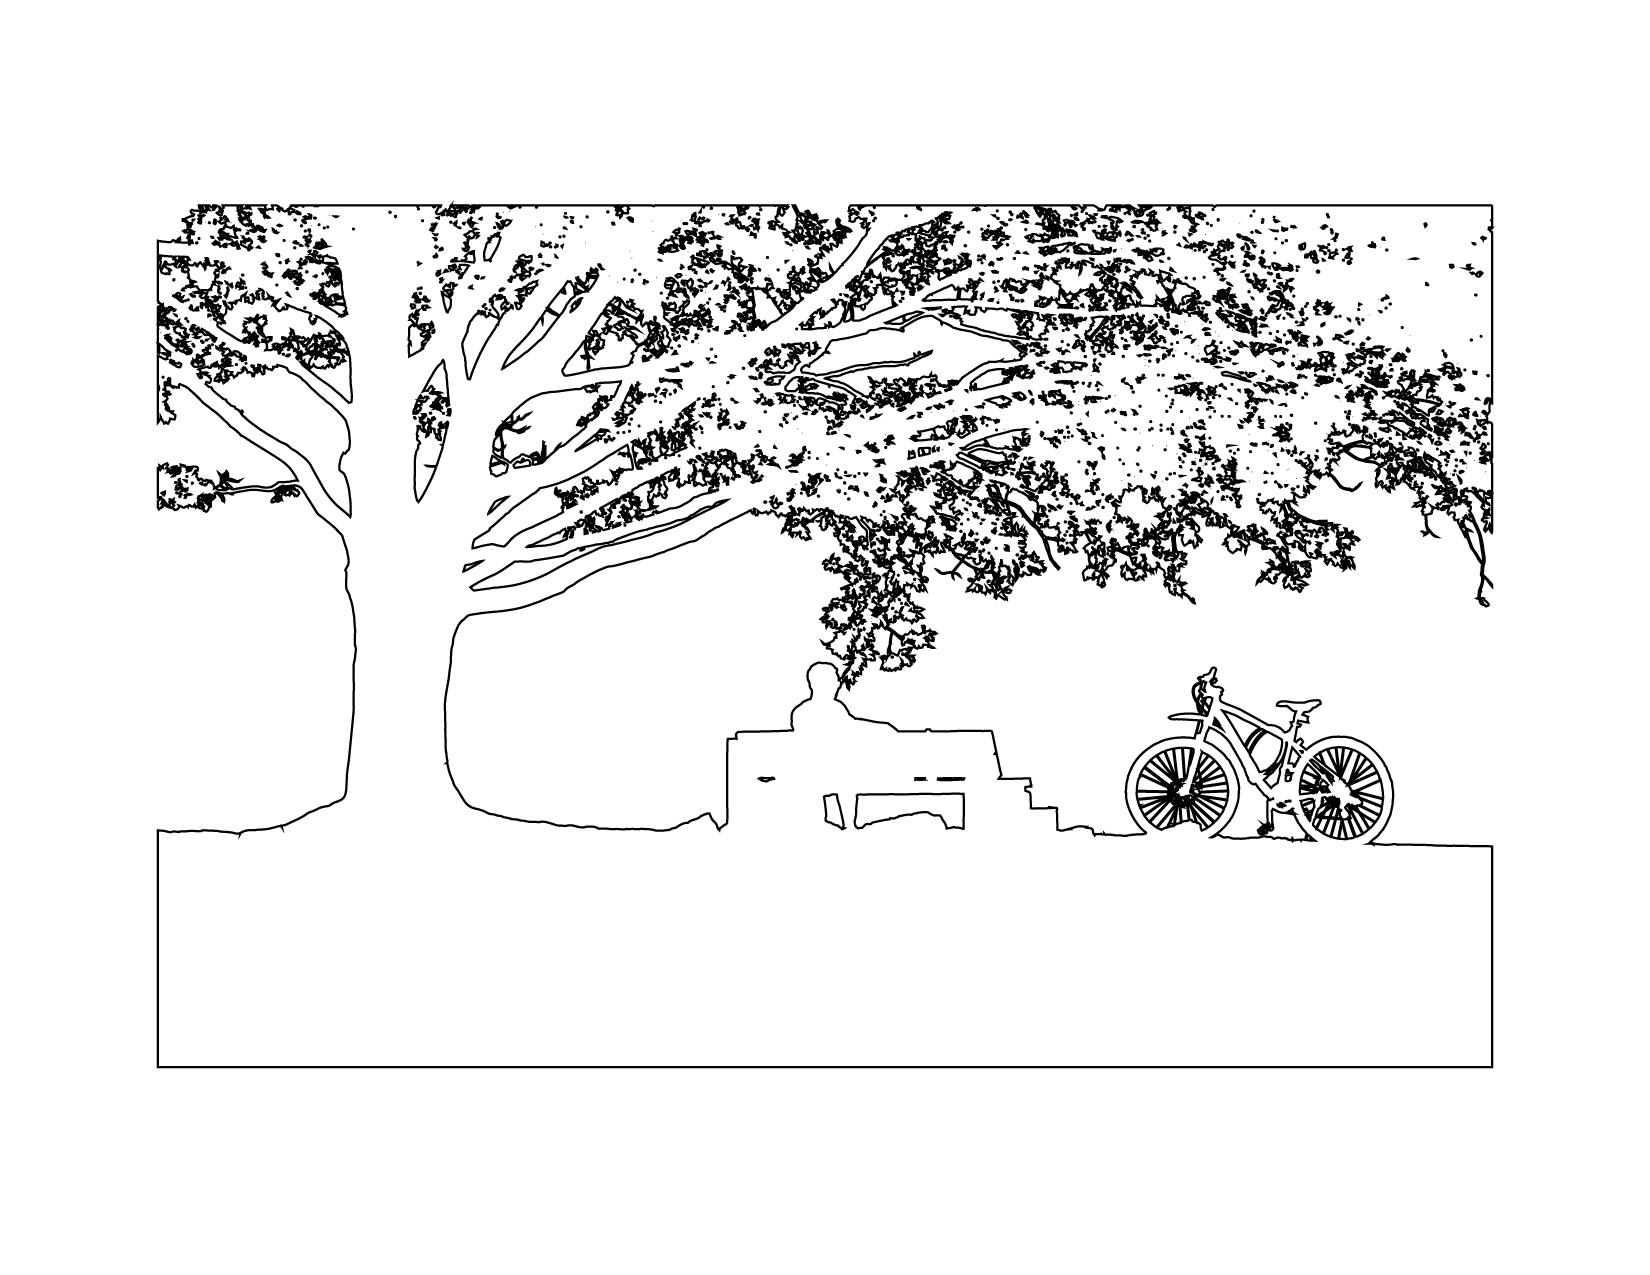 Bike Ride Rest Stop Coloring Page